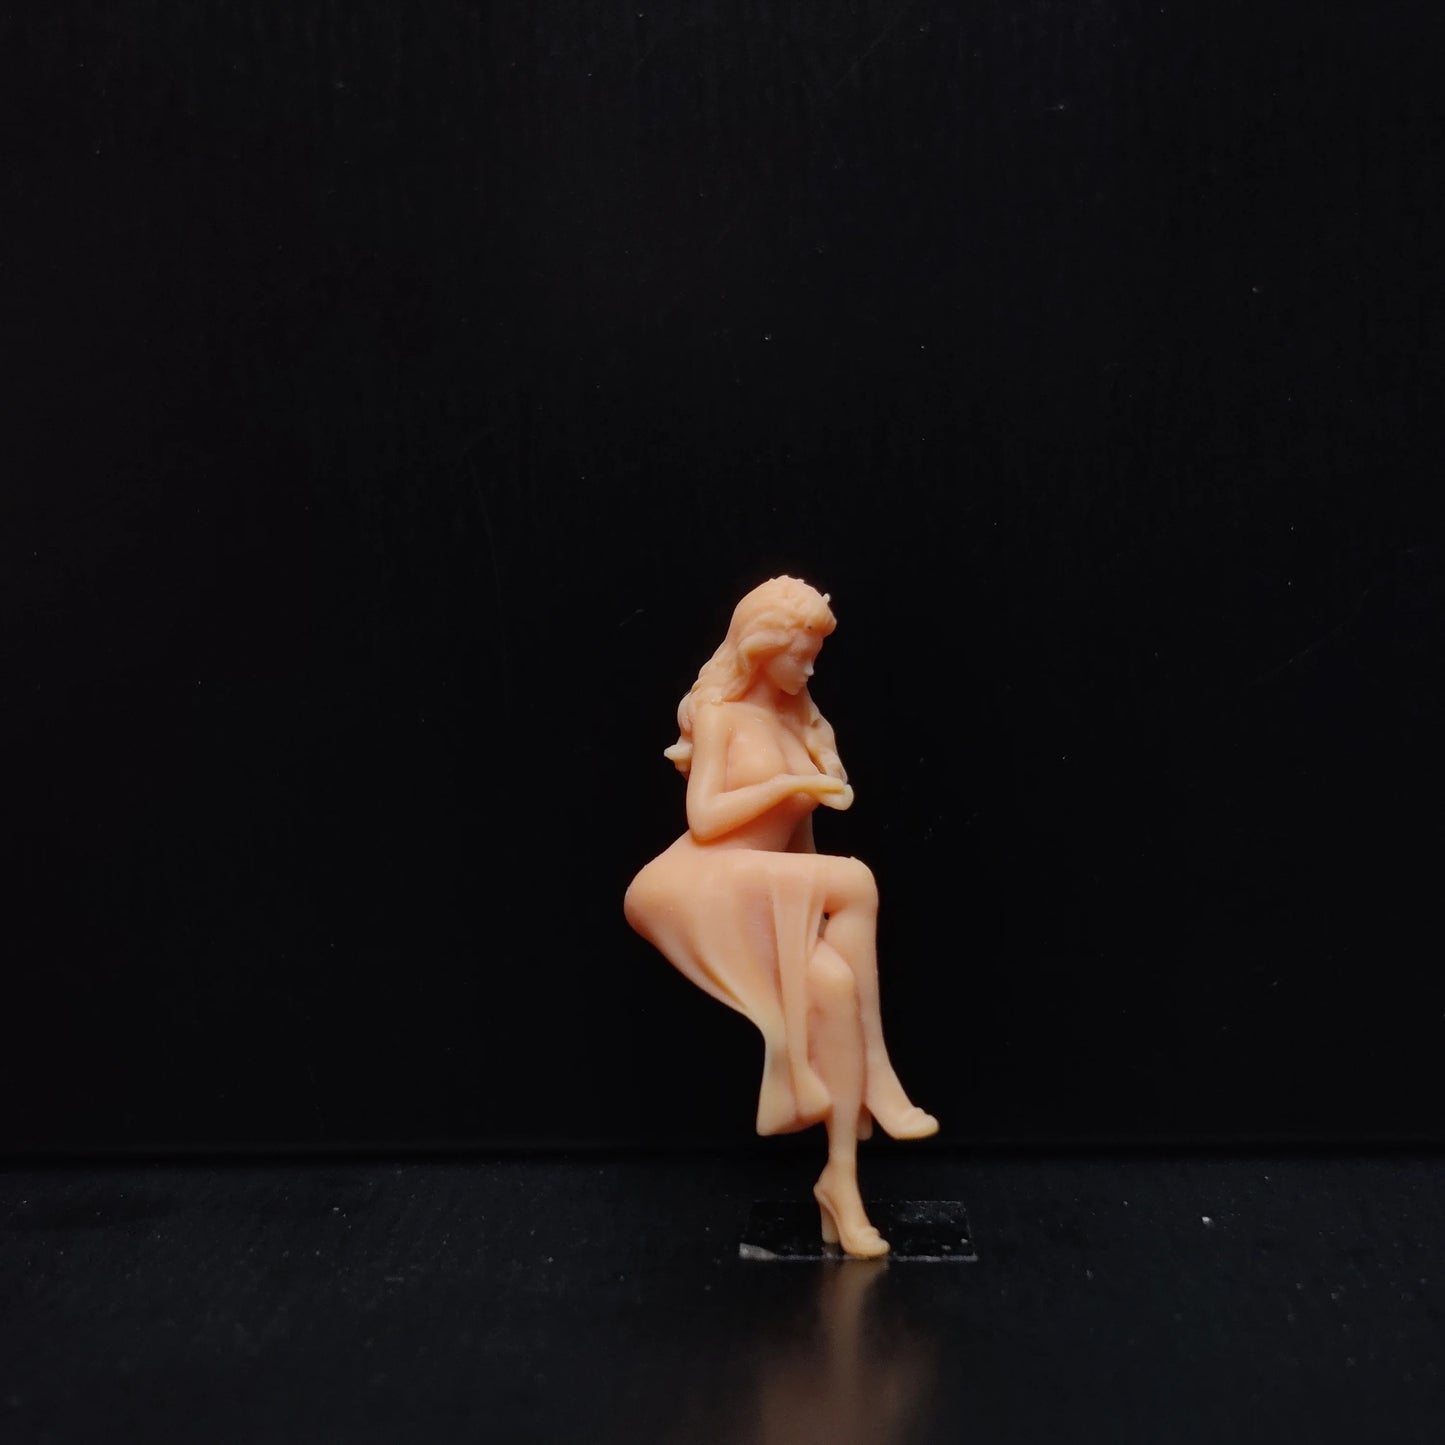 1/64 1/43 Scale Model ResinFemale with Sitting Posture and Textured FeetUncolored Miniature Diorama Hand-painted T524